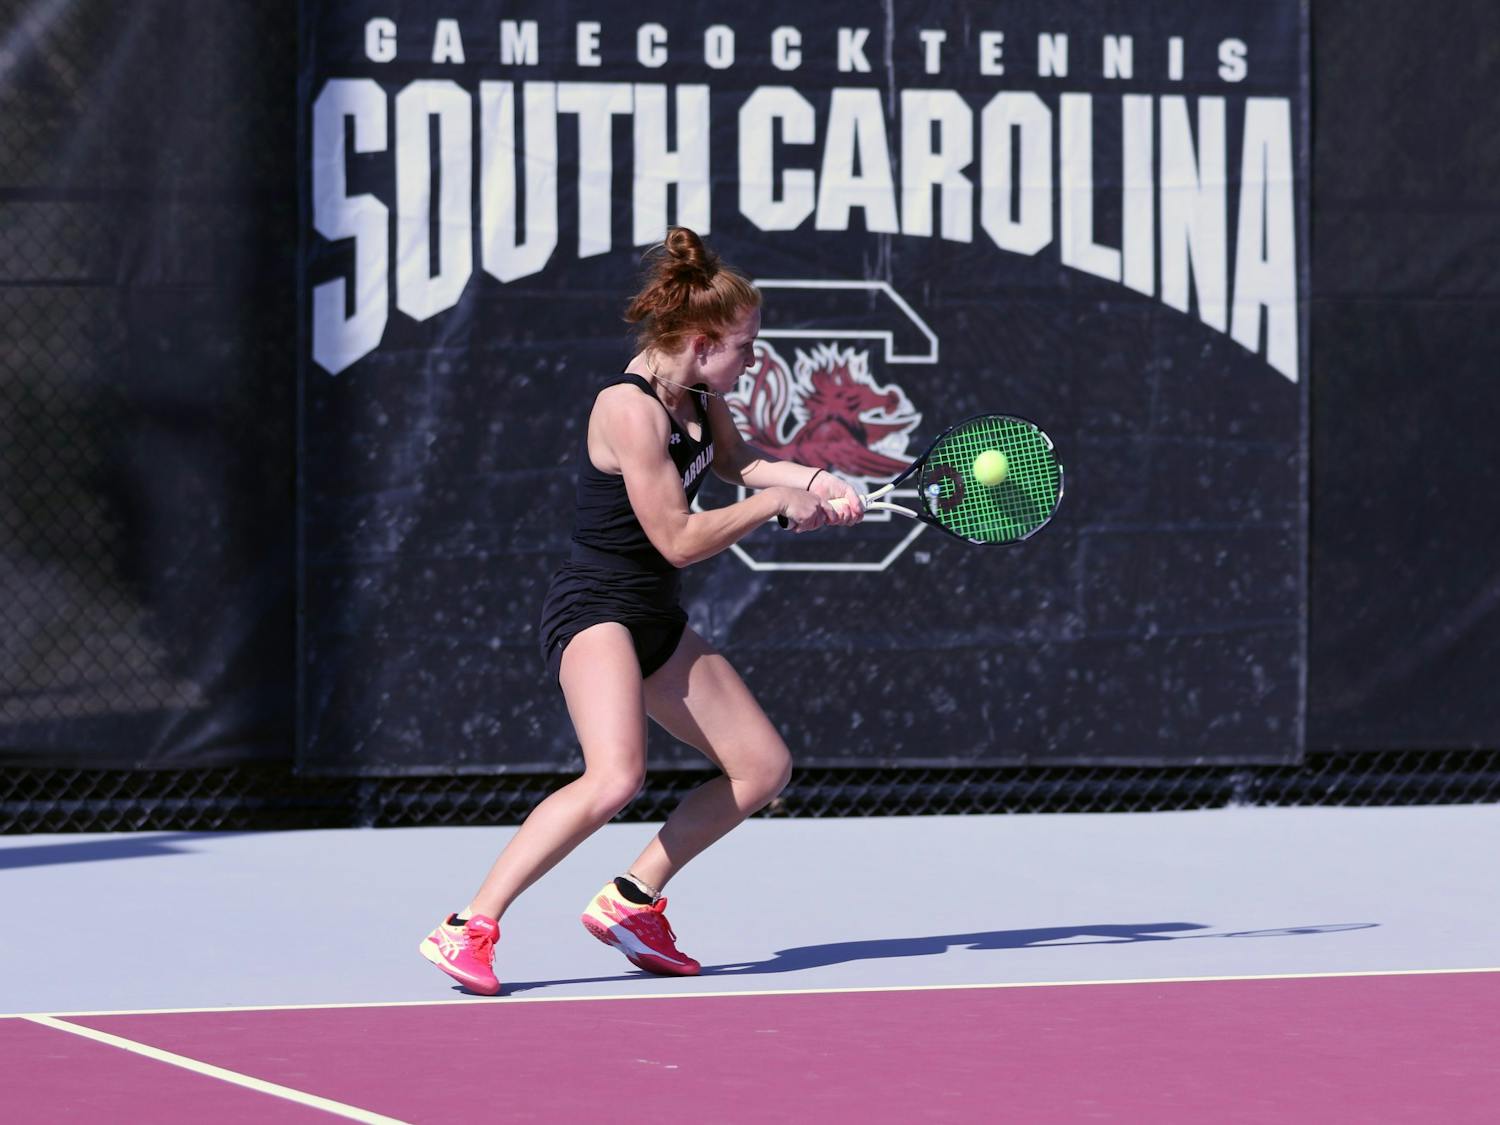 South Carolina's junior Megan Davies hits a backhand to her opponent during the match against Clemson. Overall, the Gamecocks defeated Clemson 6-1.